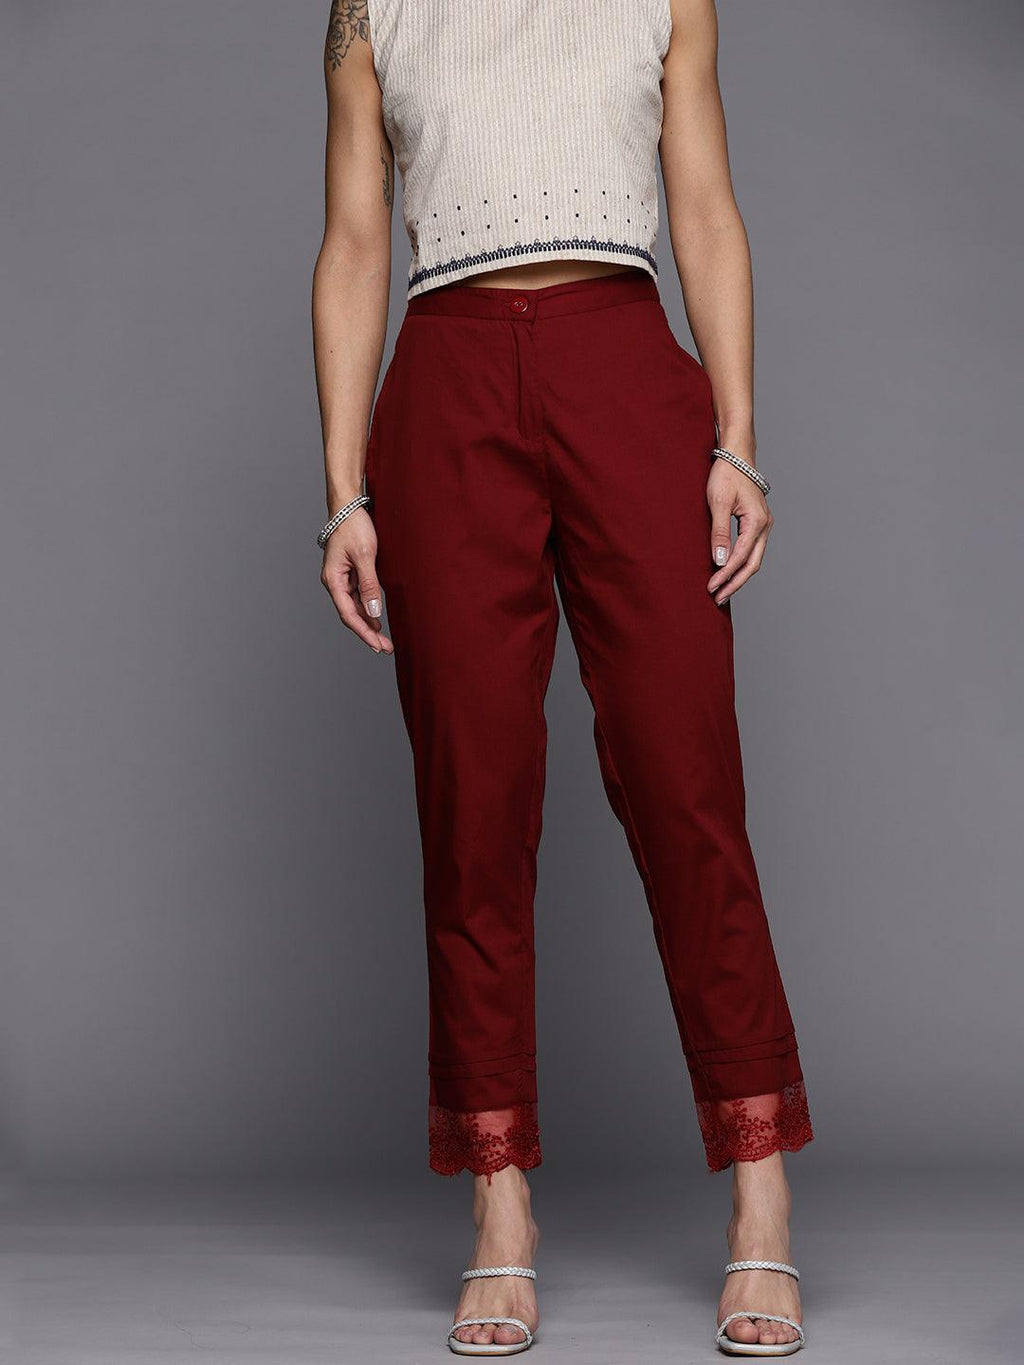 Buy Maroon Solid Cotton Trousers Online at Rs.629